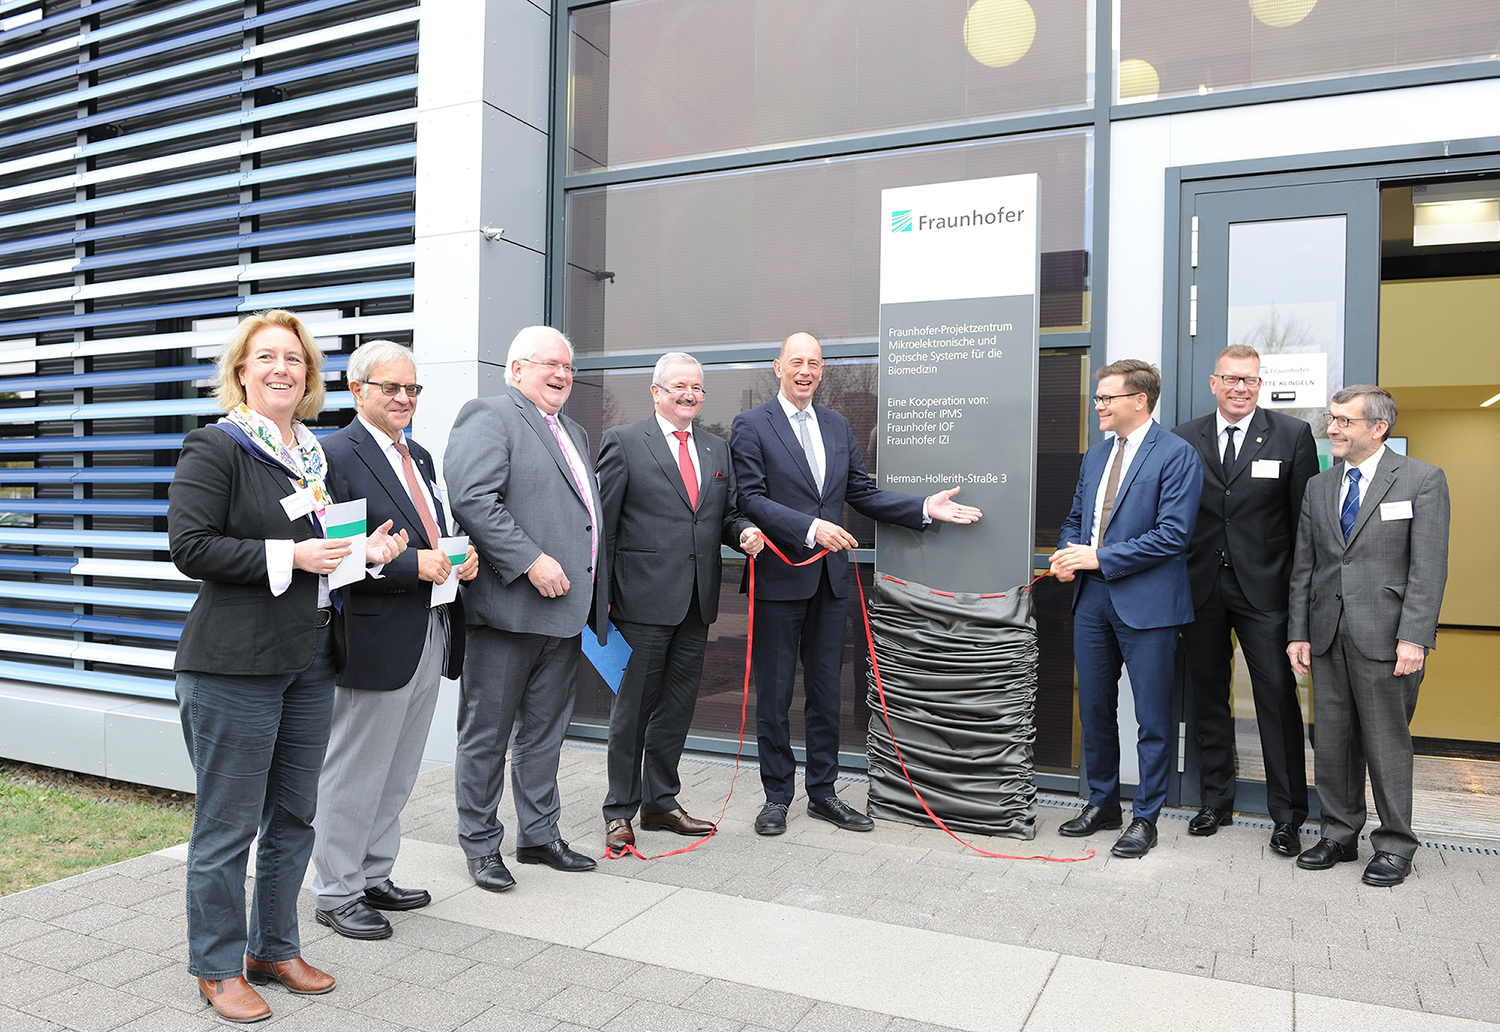 Opening of the new Fraunhofer Project Center "Microelectronic And Optical Systems For Biomedicine" (MEOS) in Erfurt, Germany.